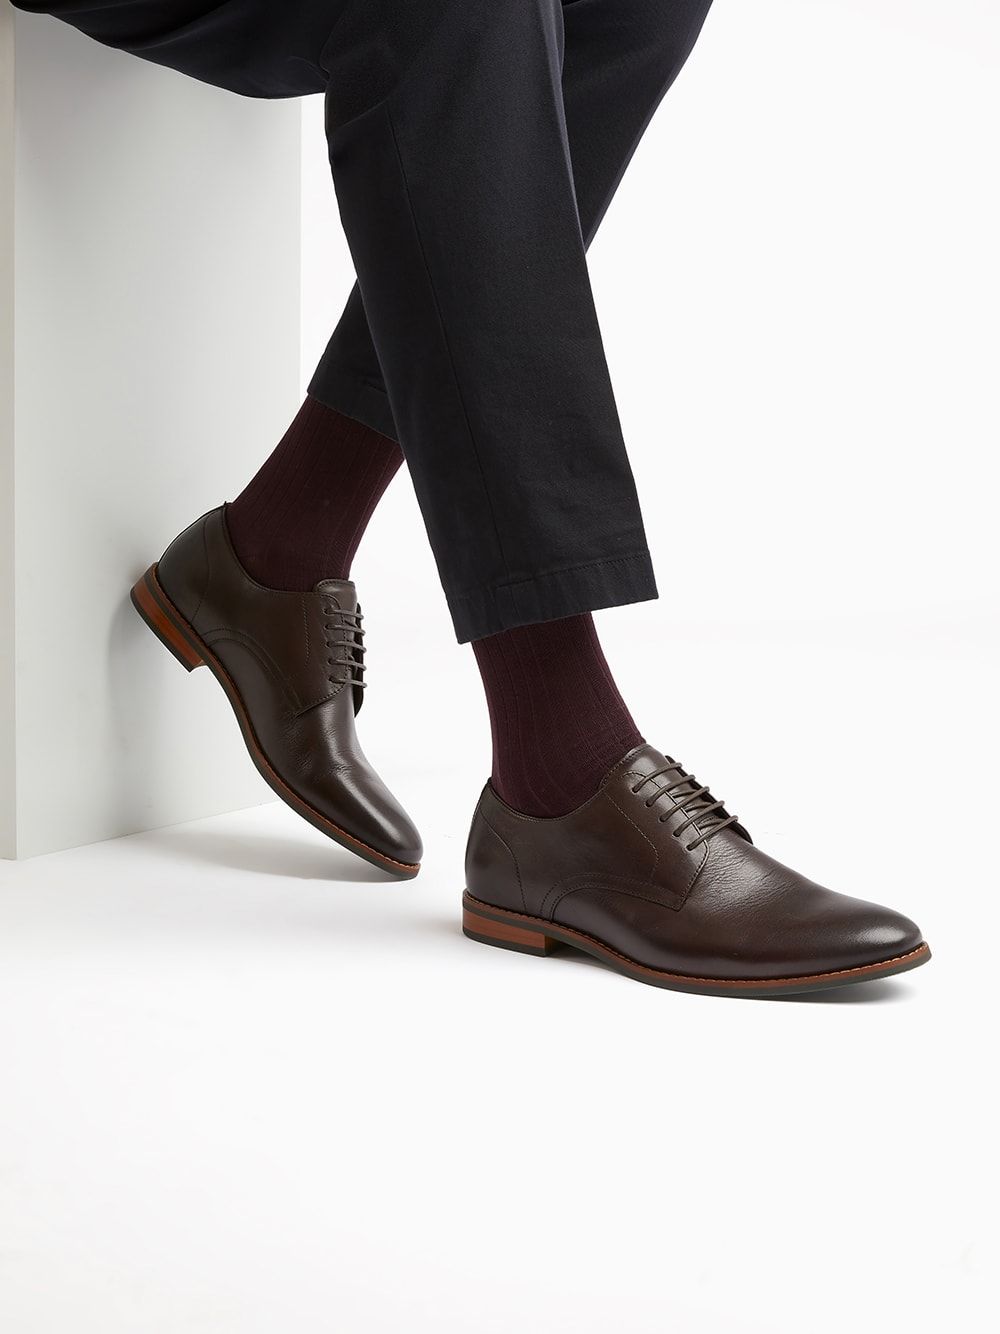 Refine your formal edit with our Suffolks Gibson shoes. Meticulously crafted from genuine leather, they feature classic top-stitch detailing along with two lace colourways to choose from